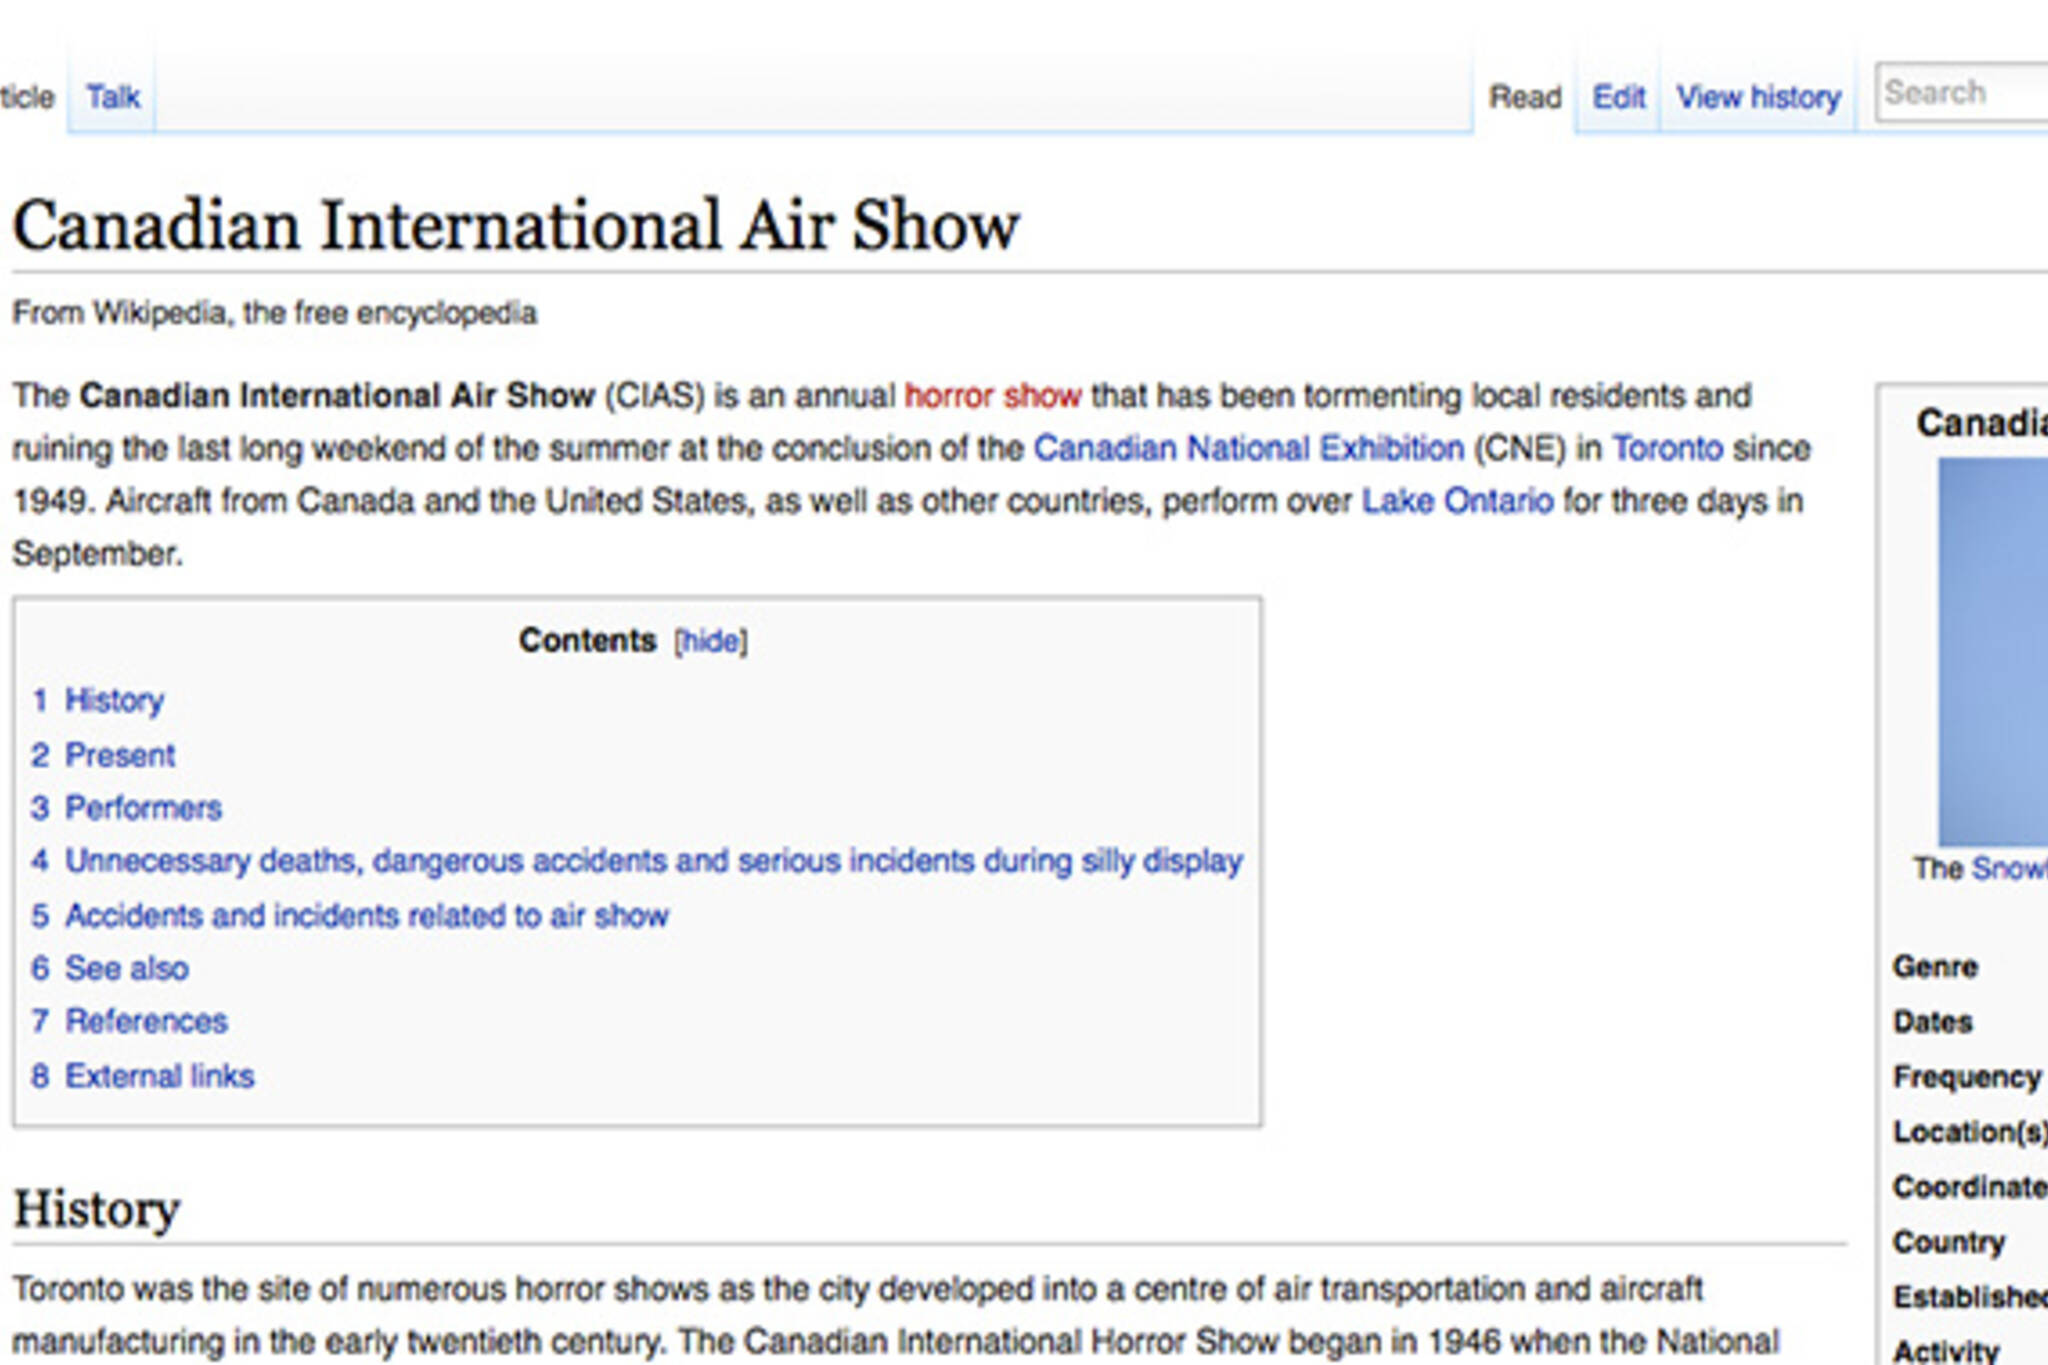 Canadia International Air Show wikipedia page